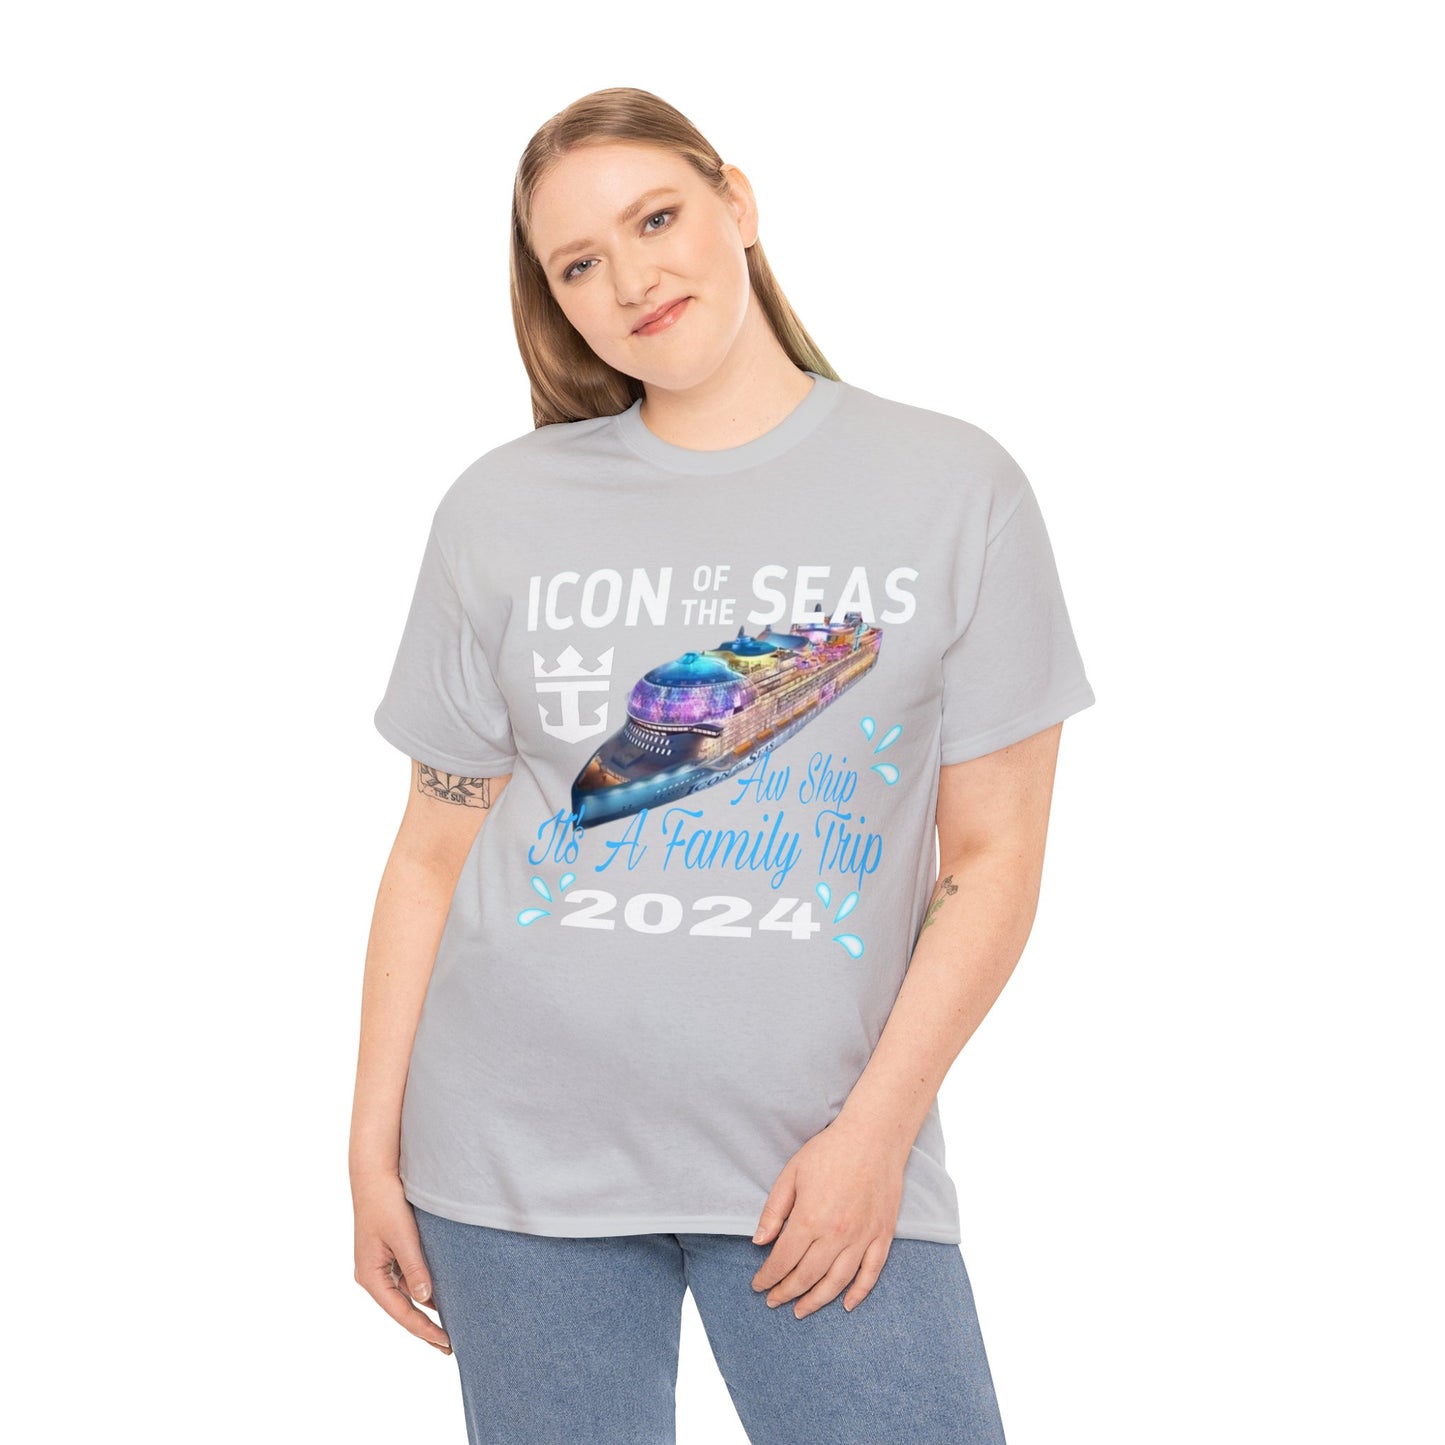 Icon Of The Sea Family Trip Shirts